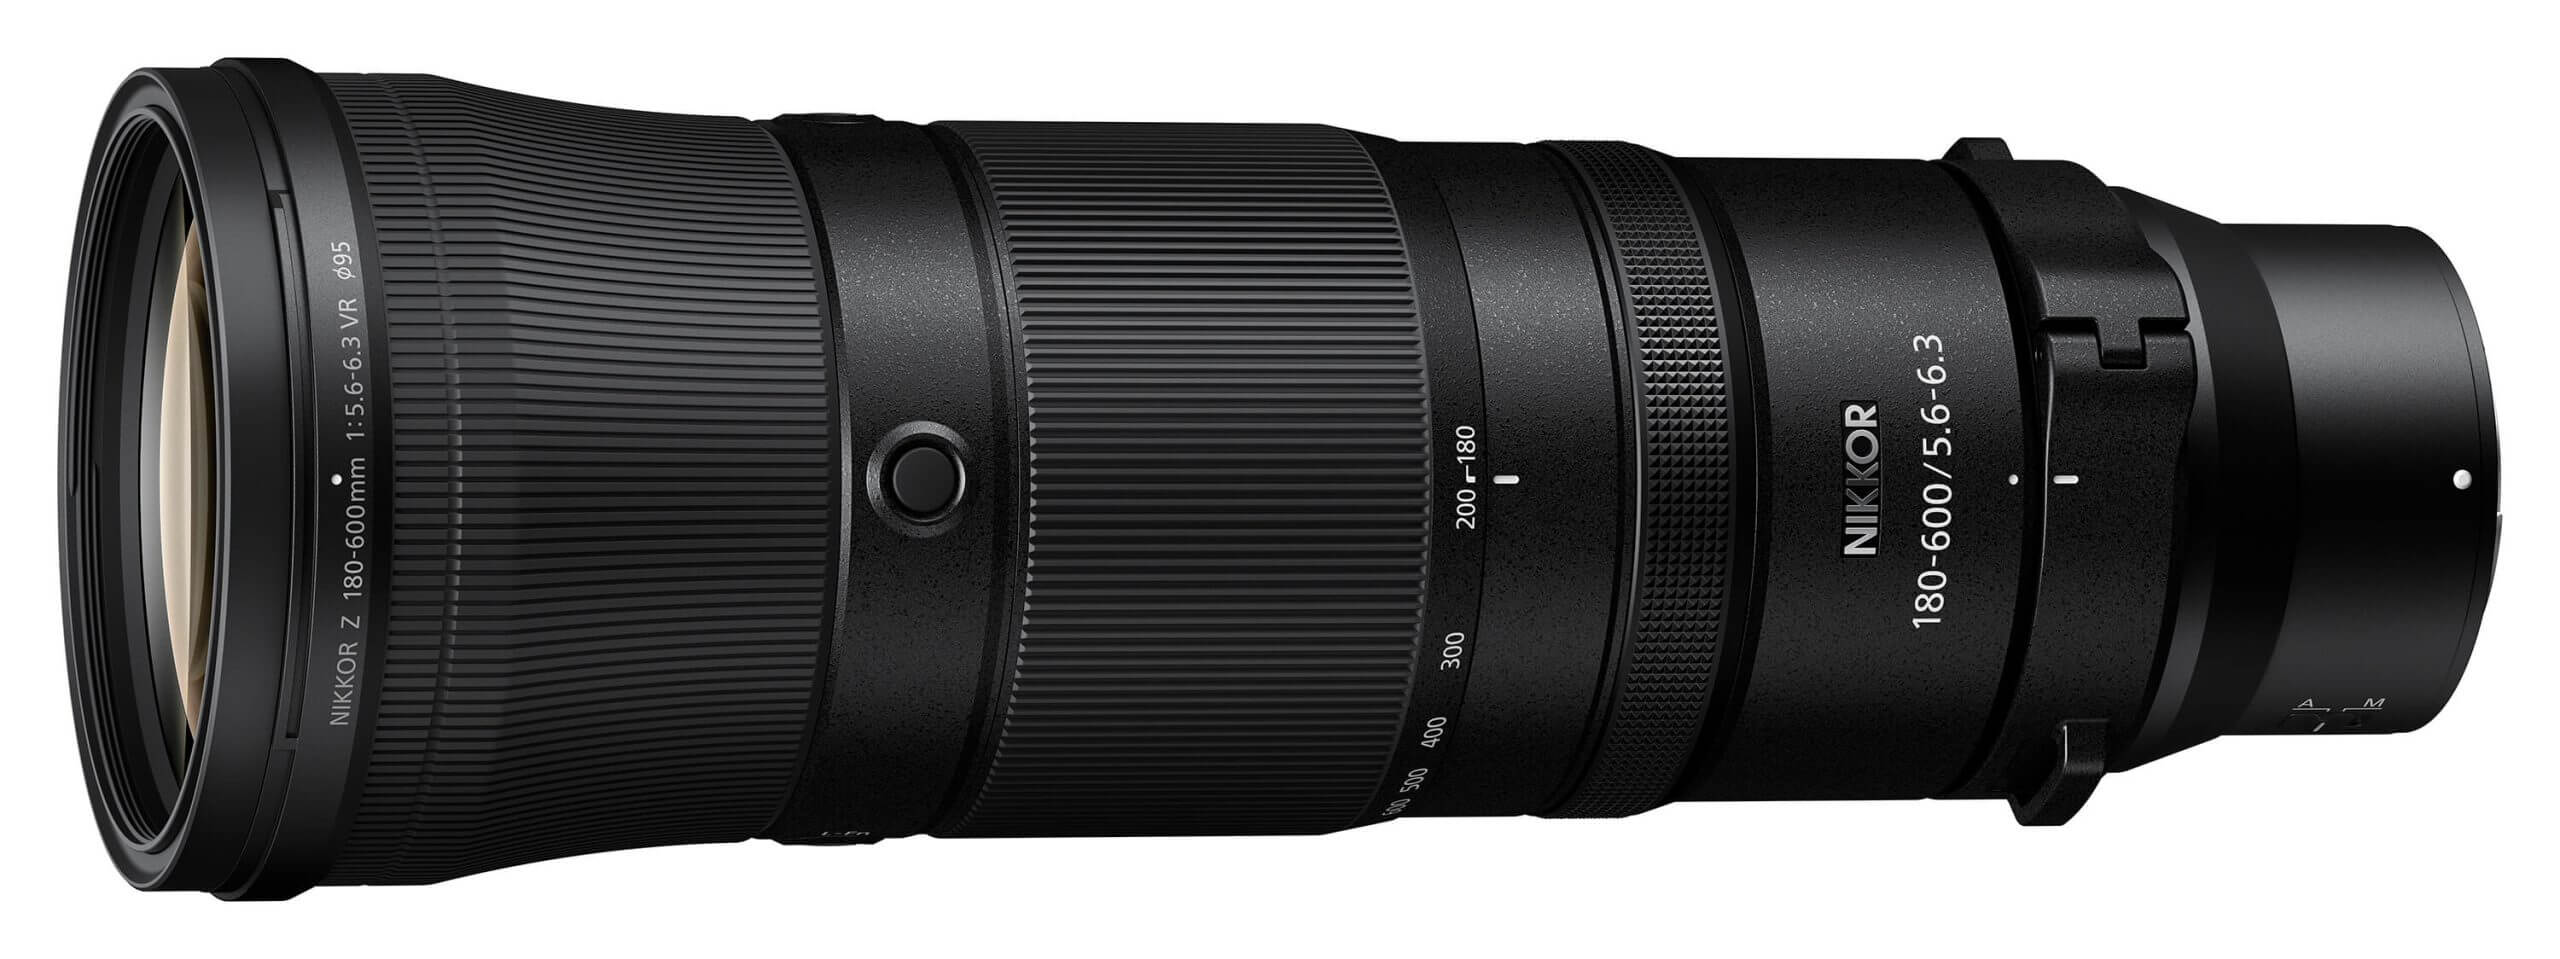 Z180 600 5 6 6 3 angle1.high  scaled - Nikon officially announces the Z 180-600mm F/5.6-6.3 VR and Z 70-180mm f/2.8